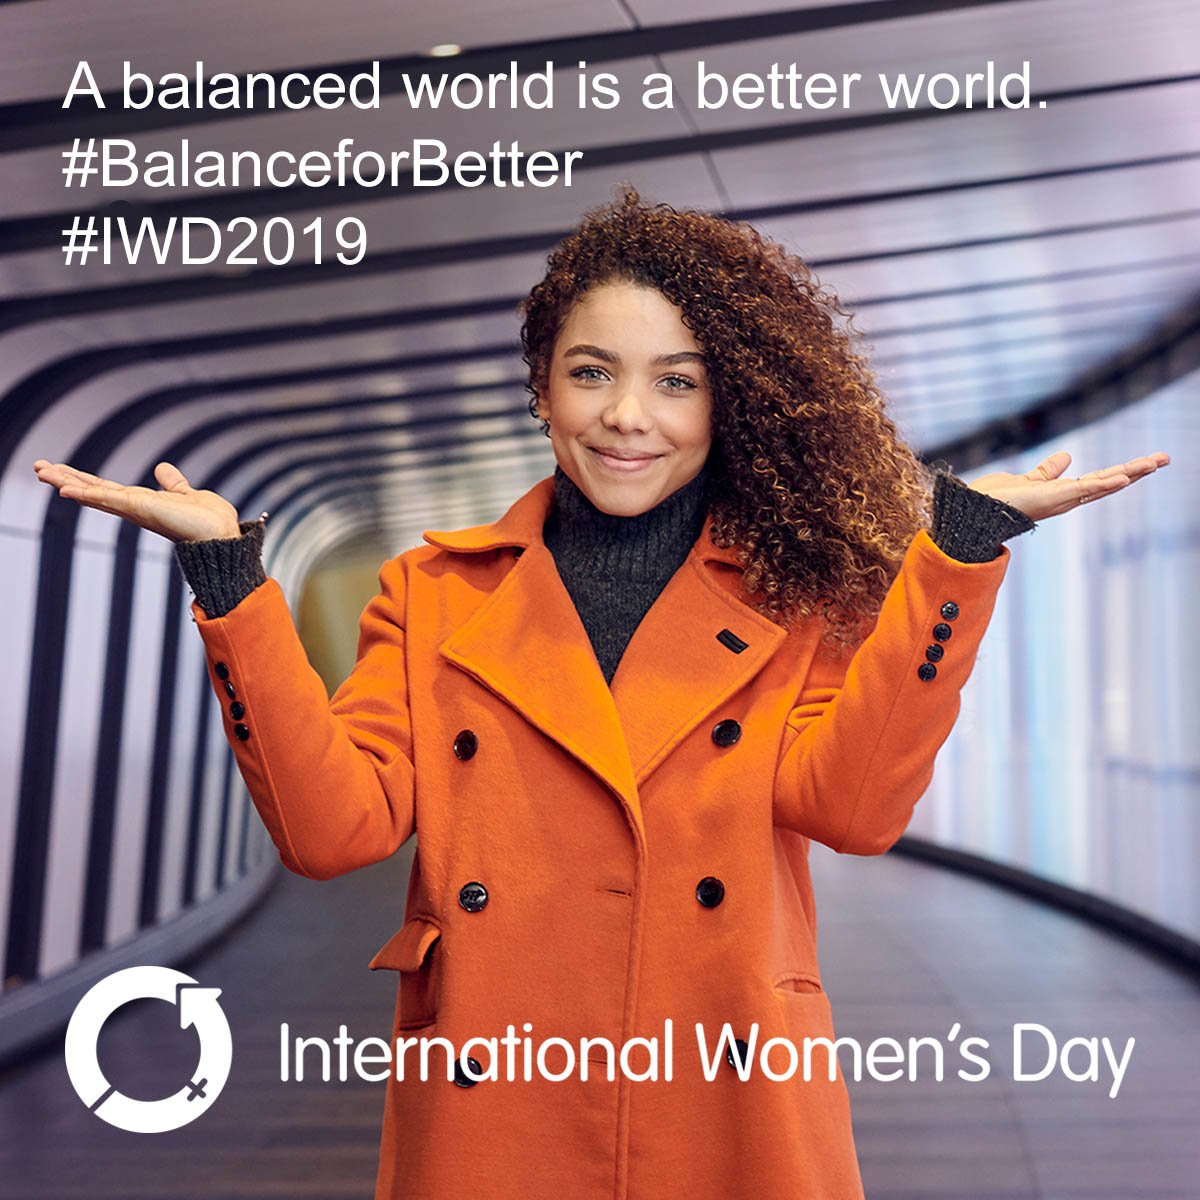 Women smiling with her hands raised. A balance world is a better world #BalanceforBetter #IWD2019